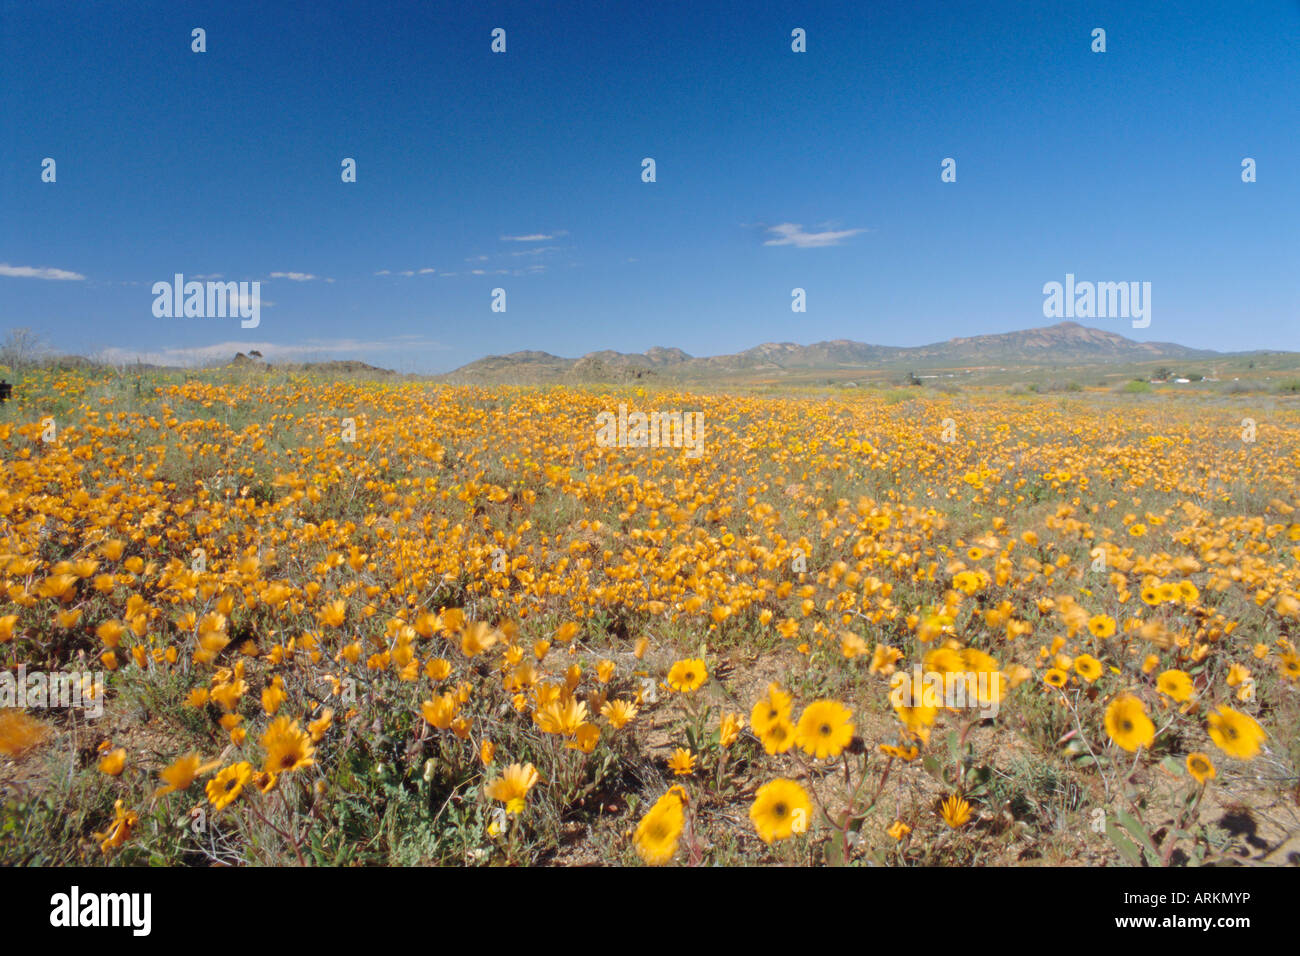 Spring flowers, Springbok, Namaqualand, Northern Cape Province, South Africa Stock Photo